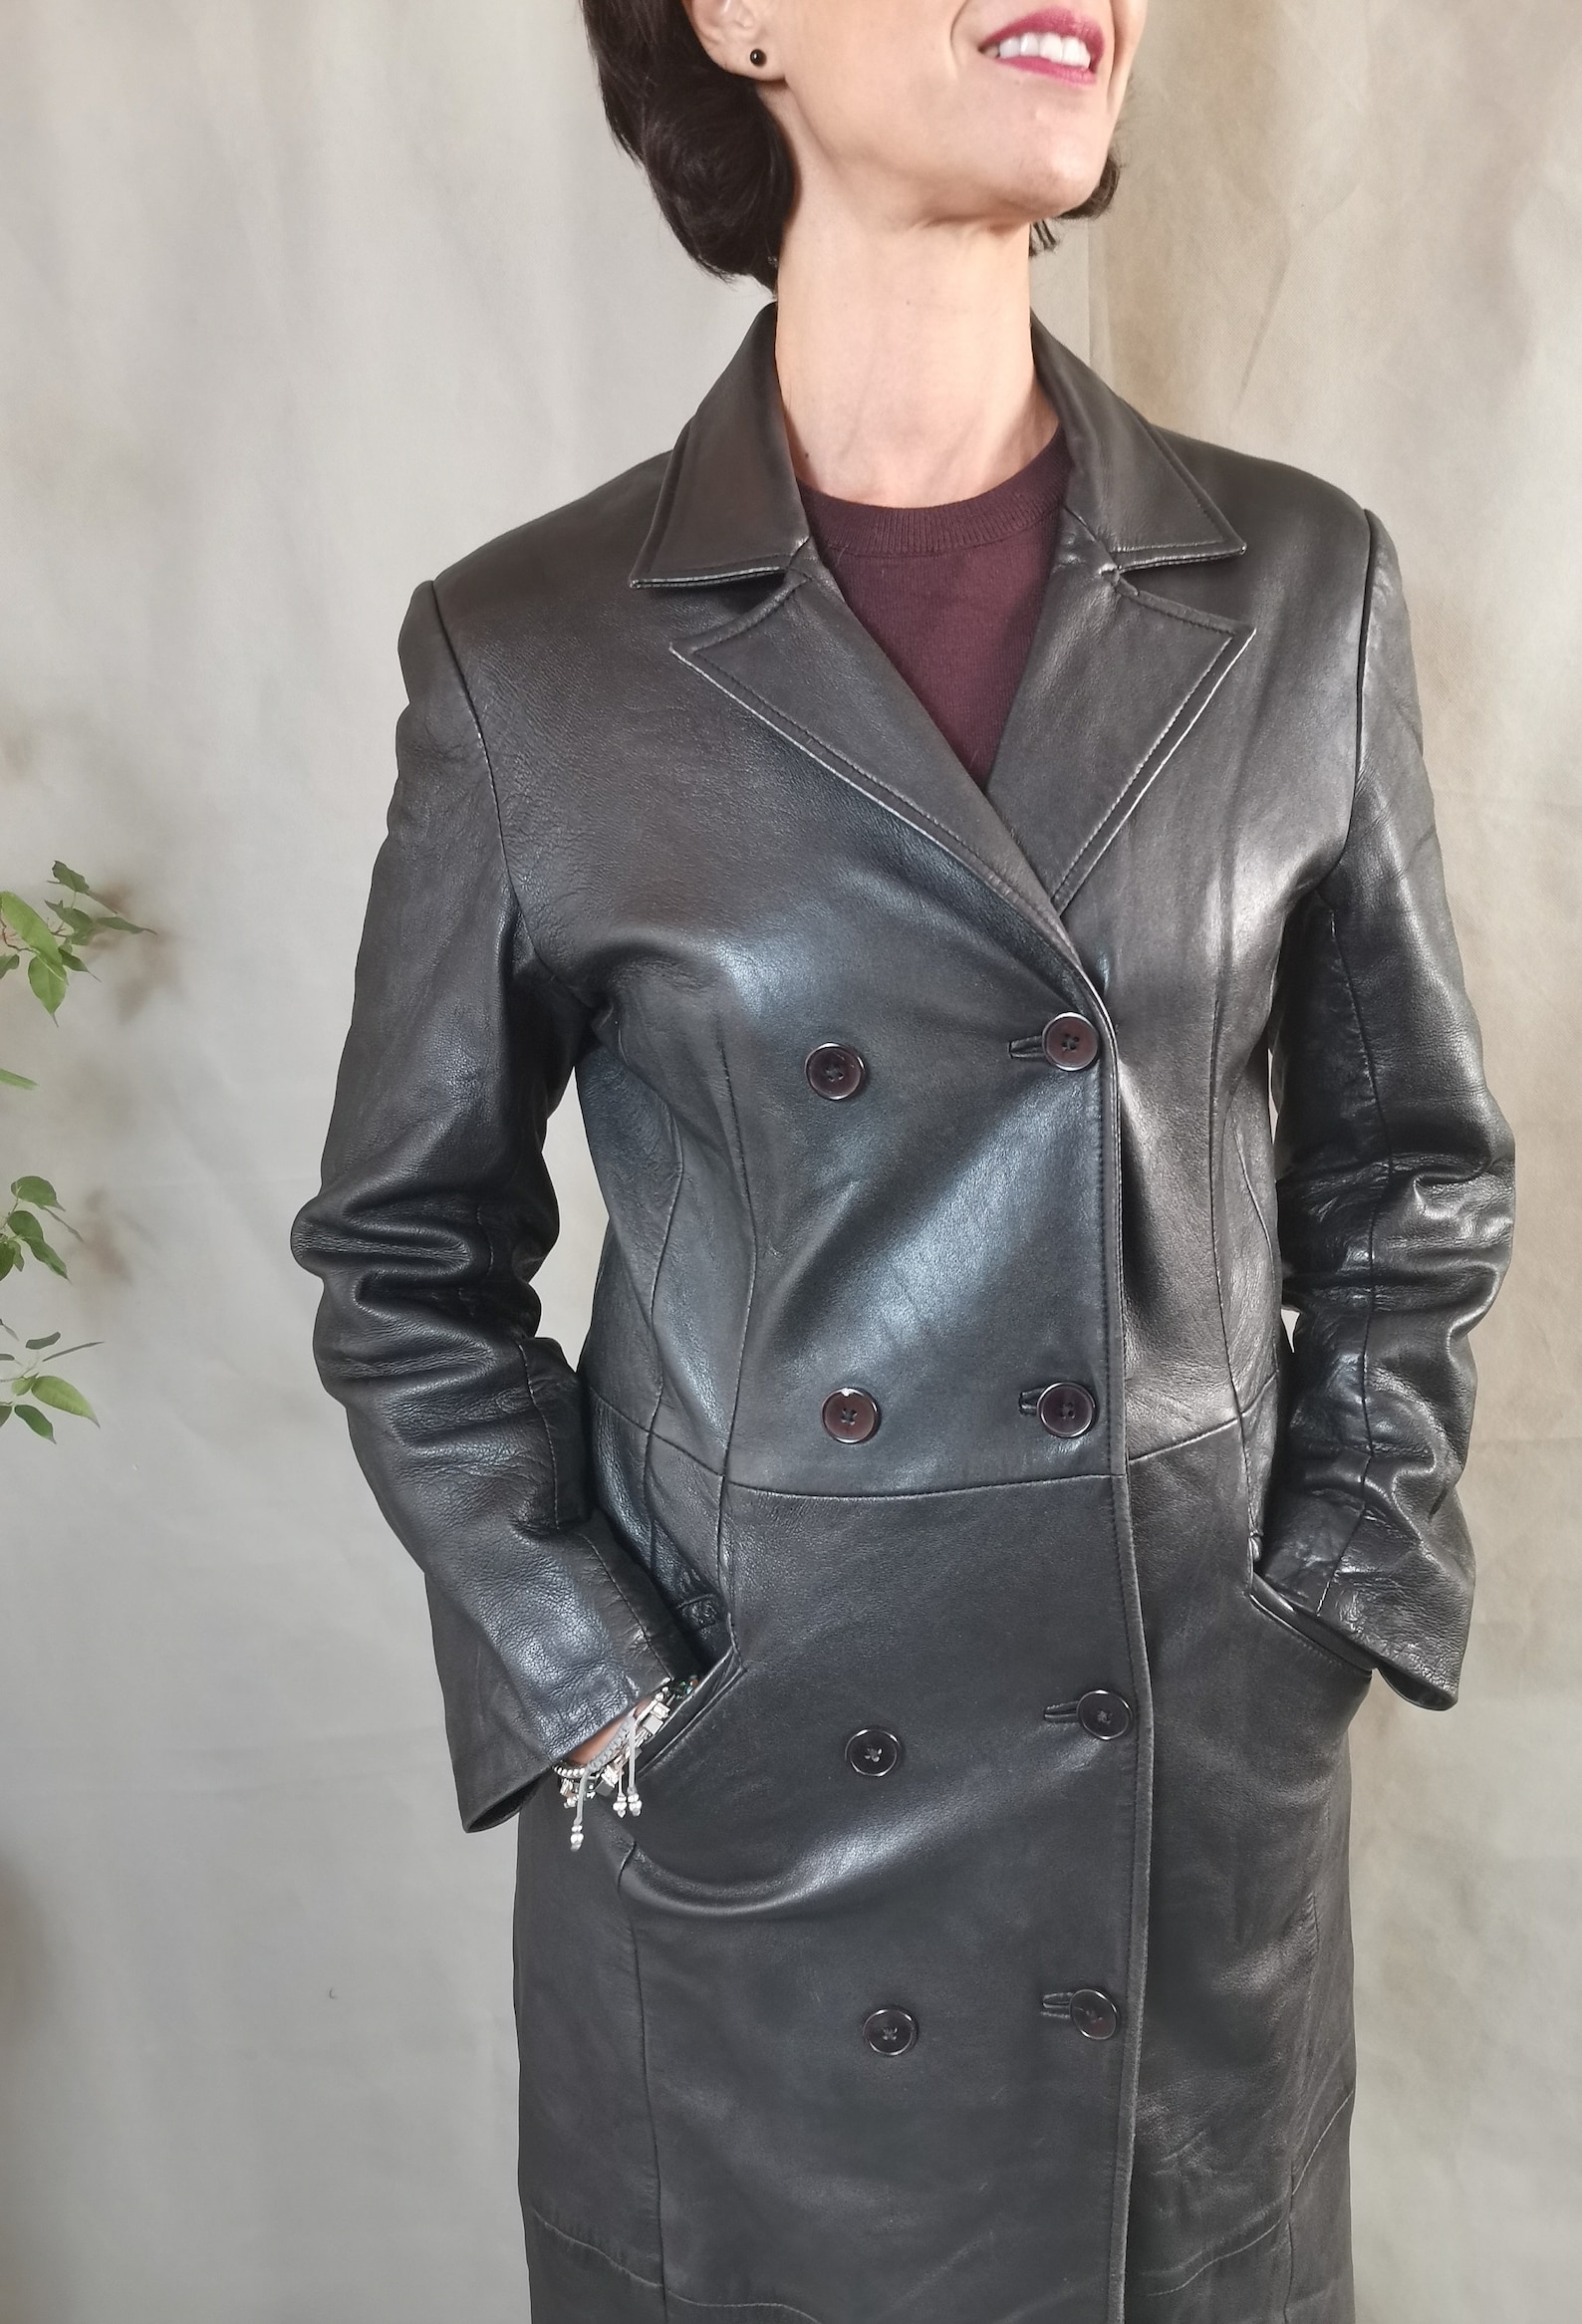 Vintage long black leather coat for women size M with pockets | Etsy